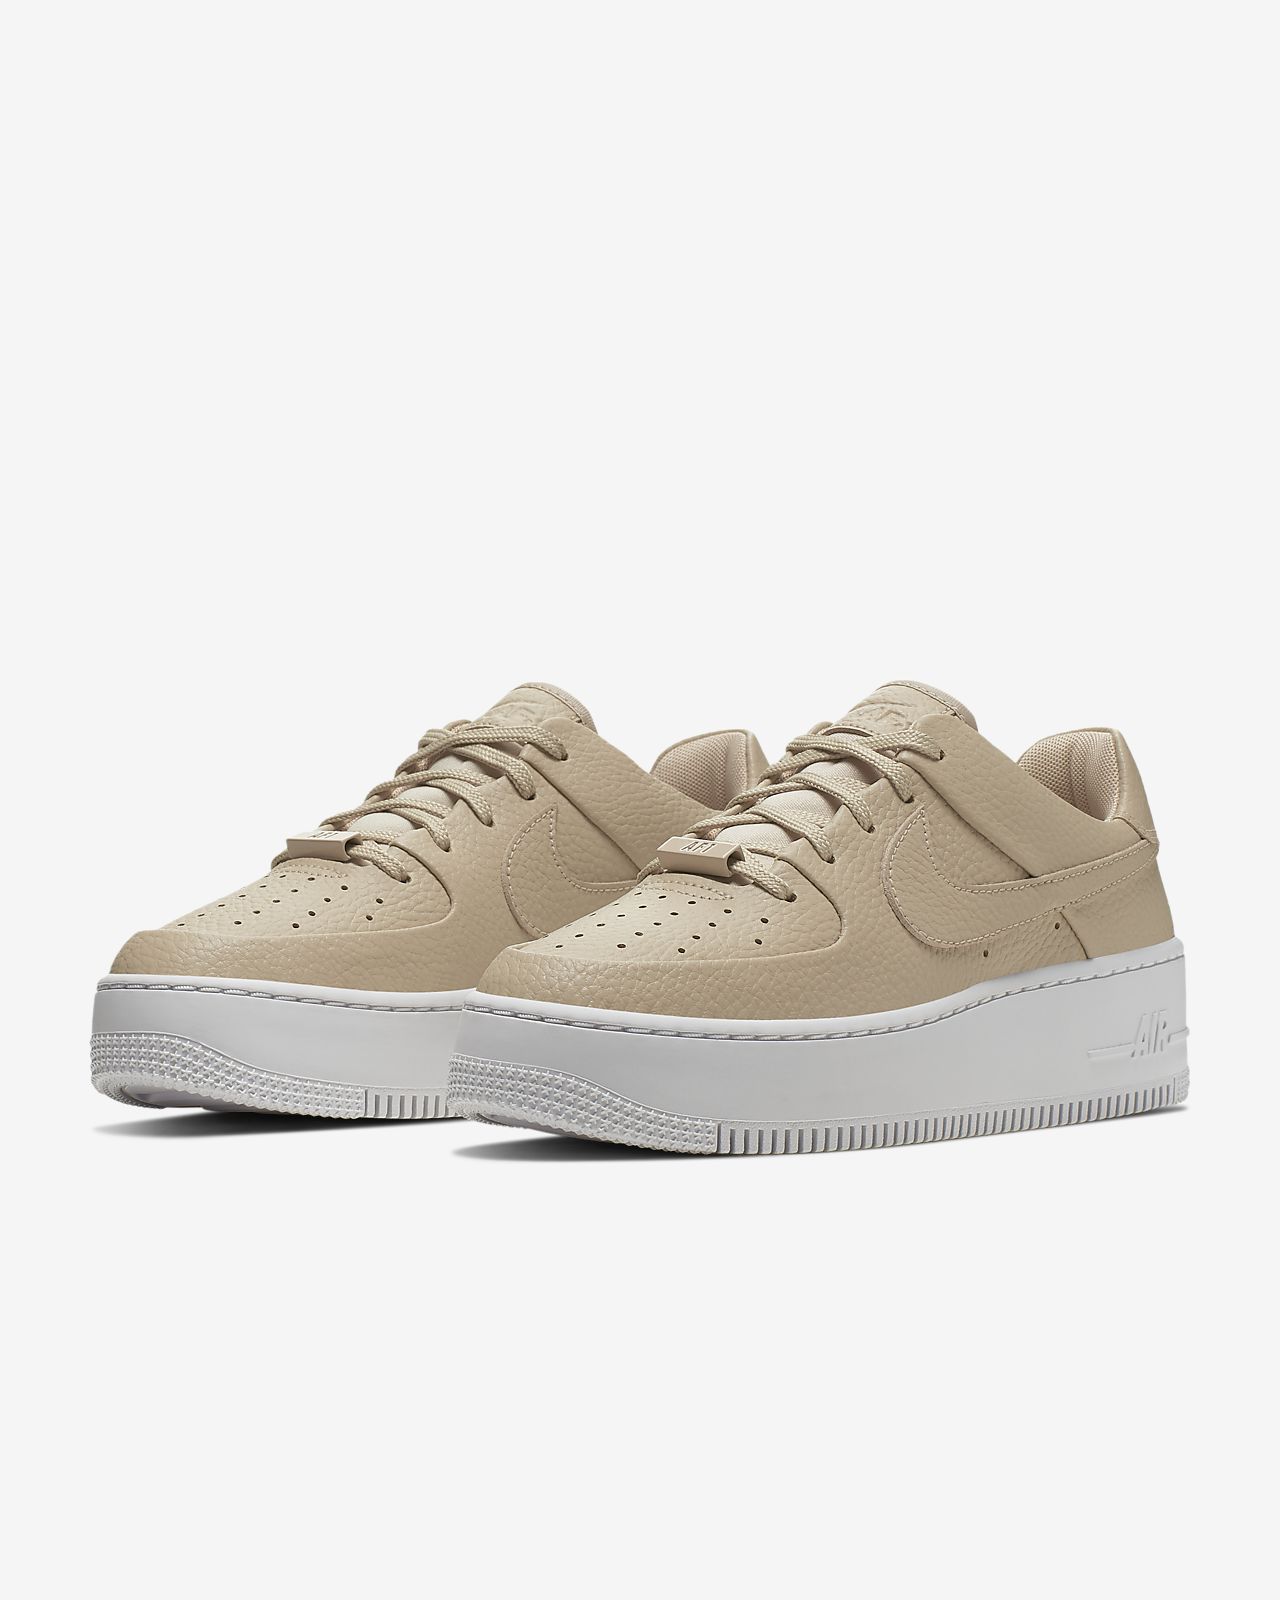 nike air force 1 sage low beige size 8